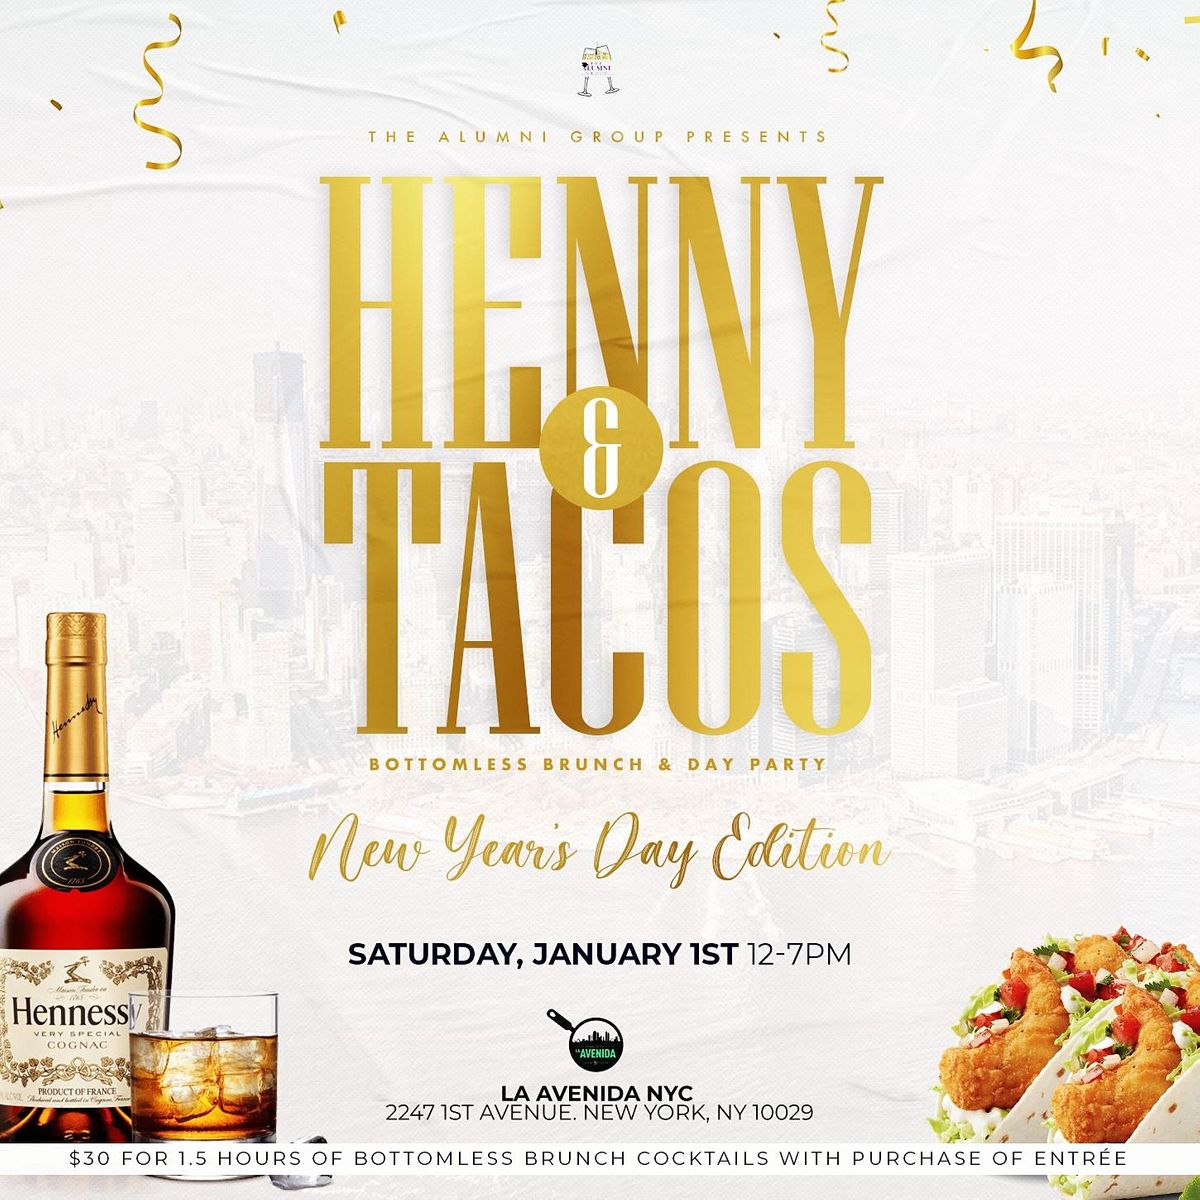 Henny & Tacos - New Year's Day Bottomless Brunch & Day Party